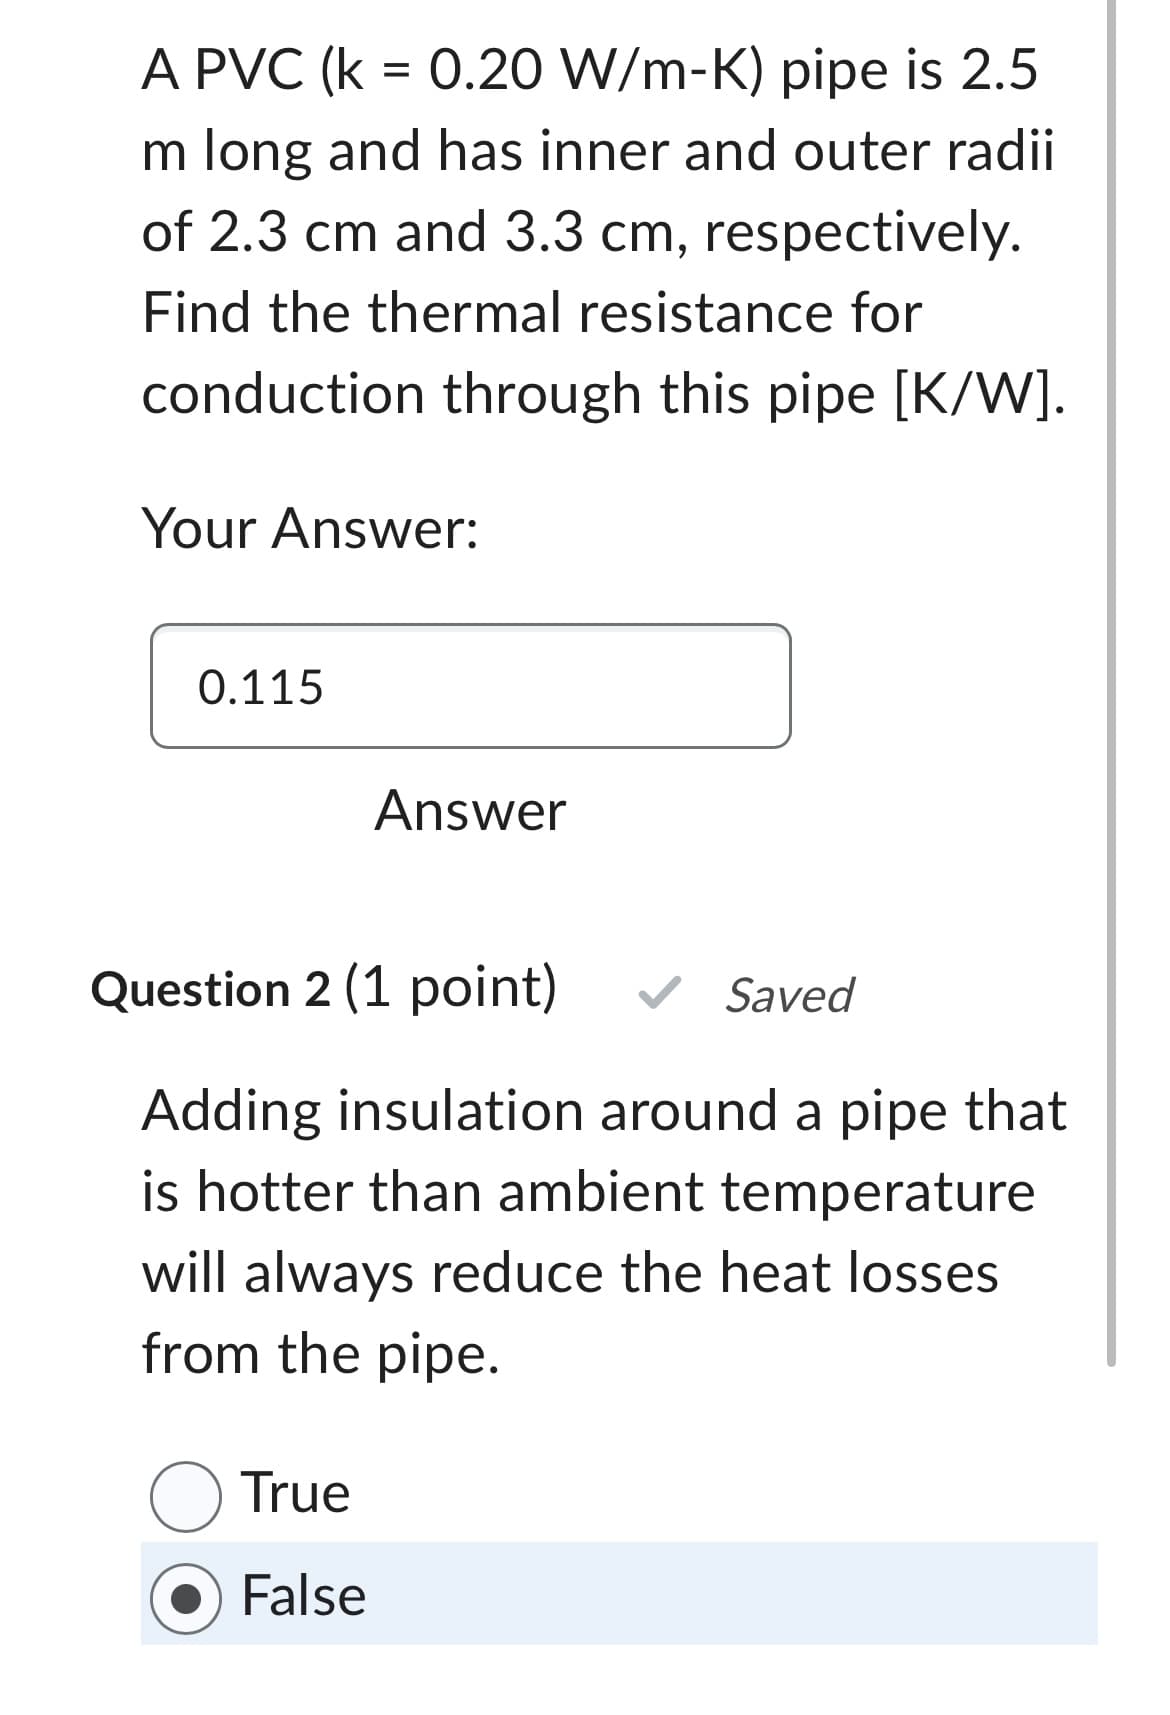 A PVC (k = 0.20 W/m-K) pipe is 2.5
m long and has inner and outer radii
of 2.3 cm and 3.3 cm, respectively.
Find the thermal resistance for
conduction through this pipe [K/W].
Your Answer:
0.115
Answer
Question 2 (1 point) ✓ Saved
Adding insulation around a pipe that
is hotter than ambient temperature
will always reduce the heat losses
from the pipe.
O True
False